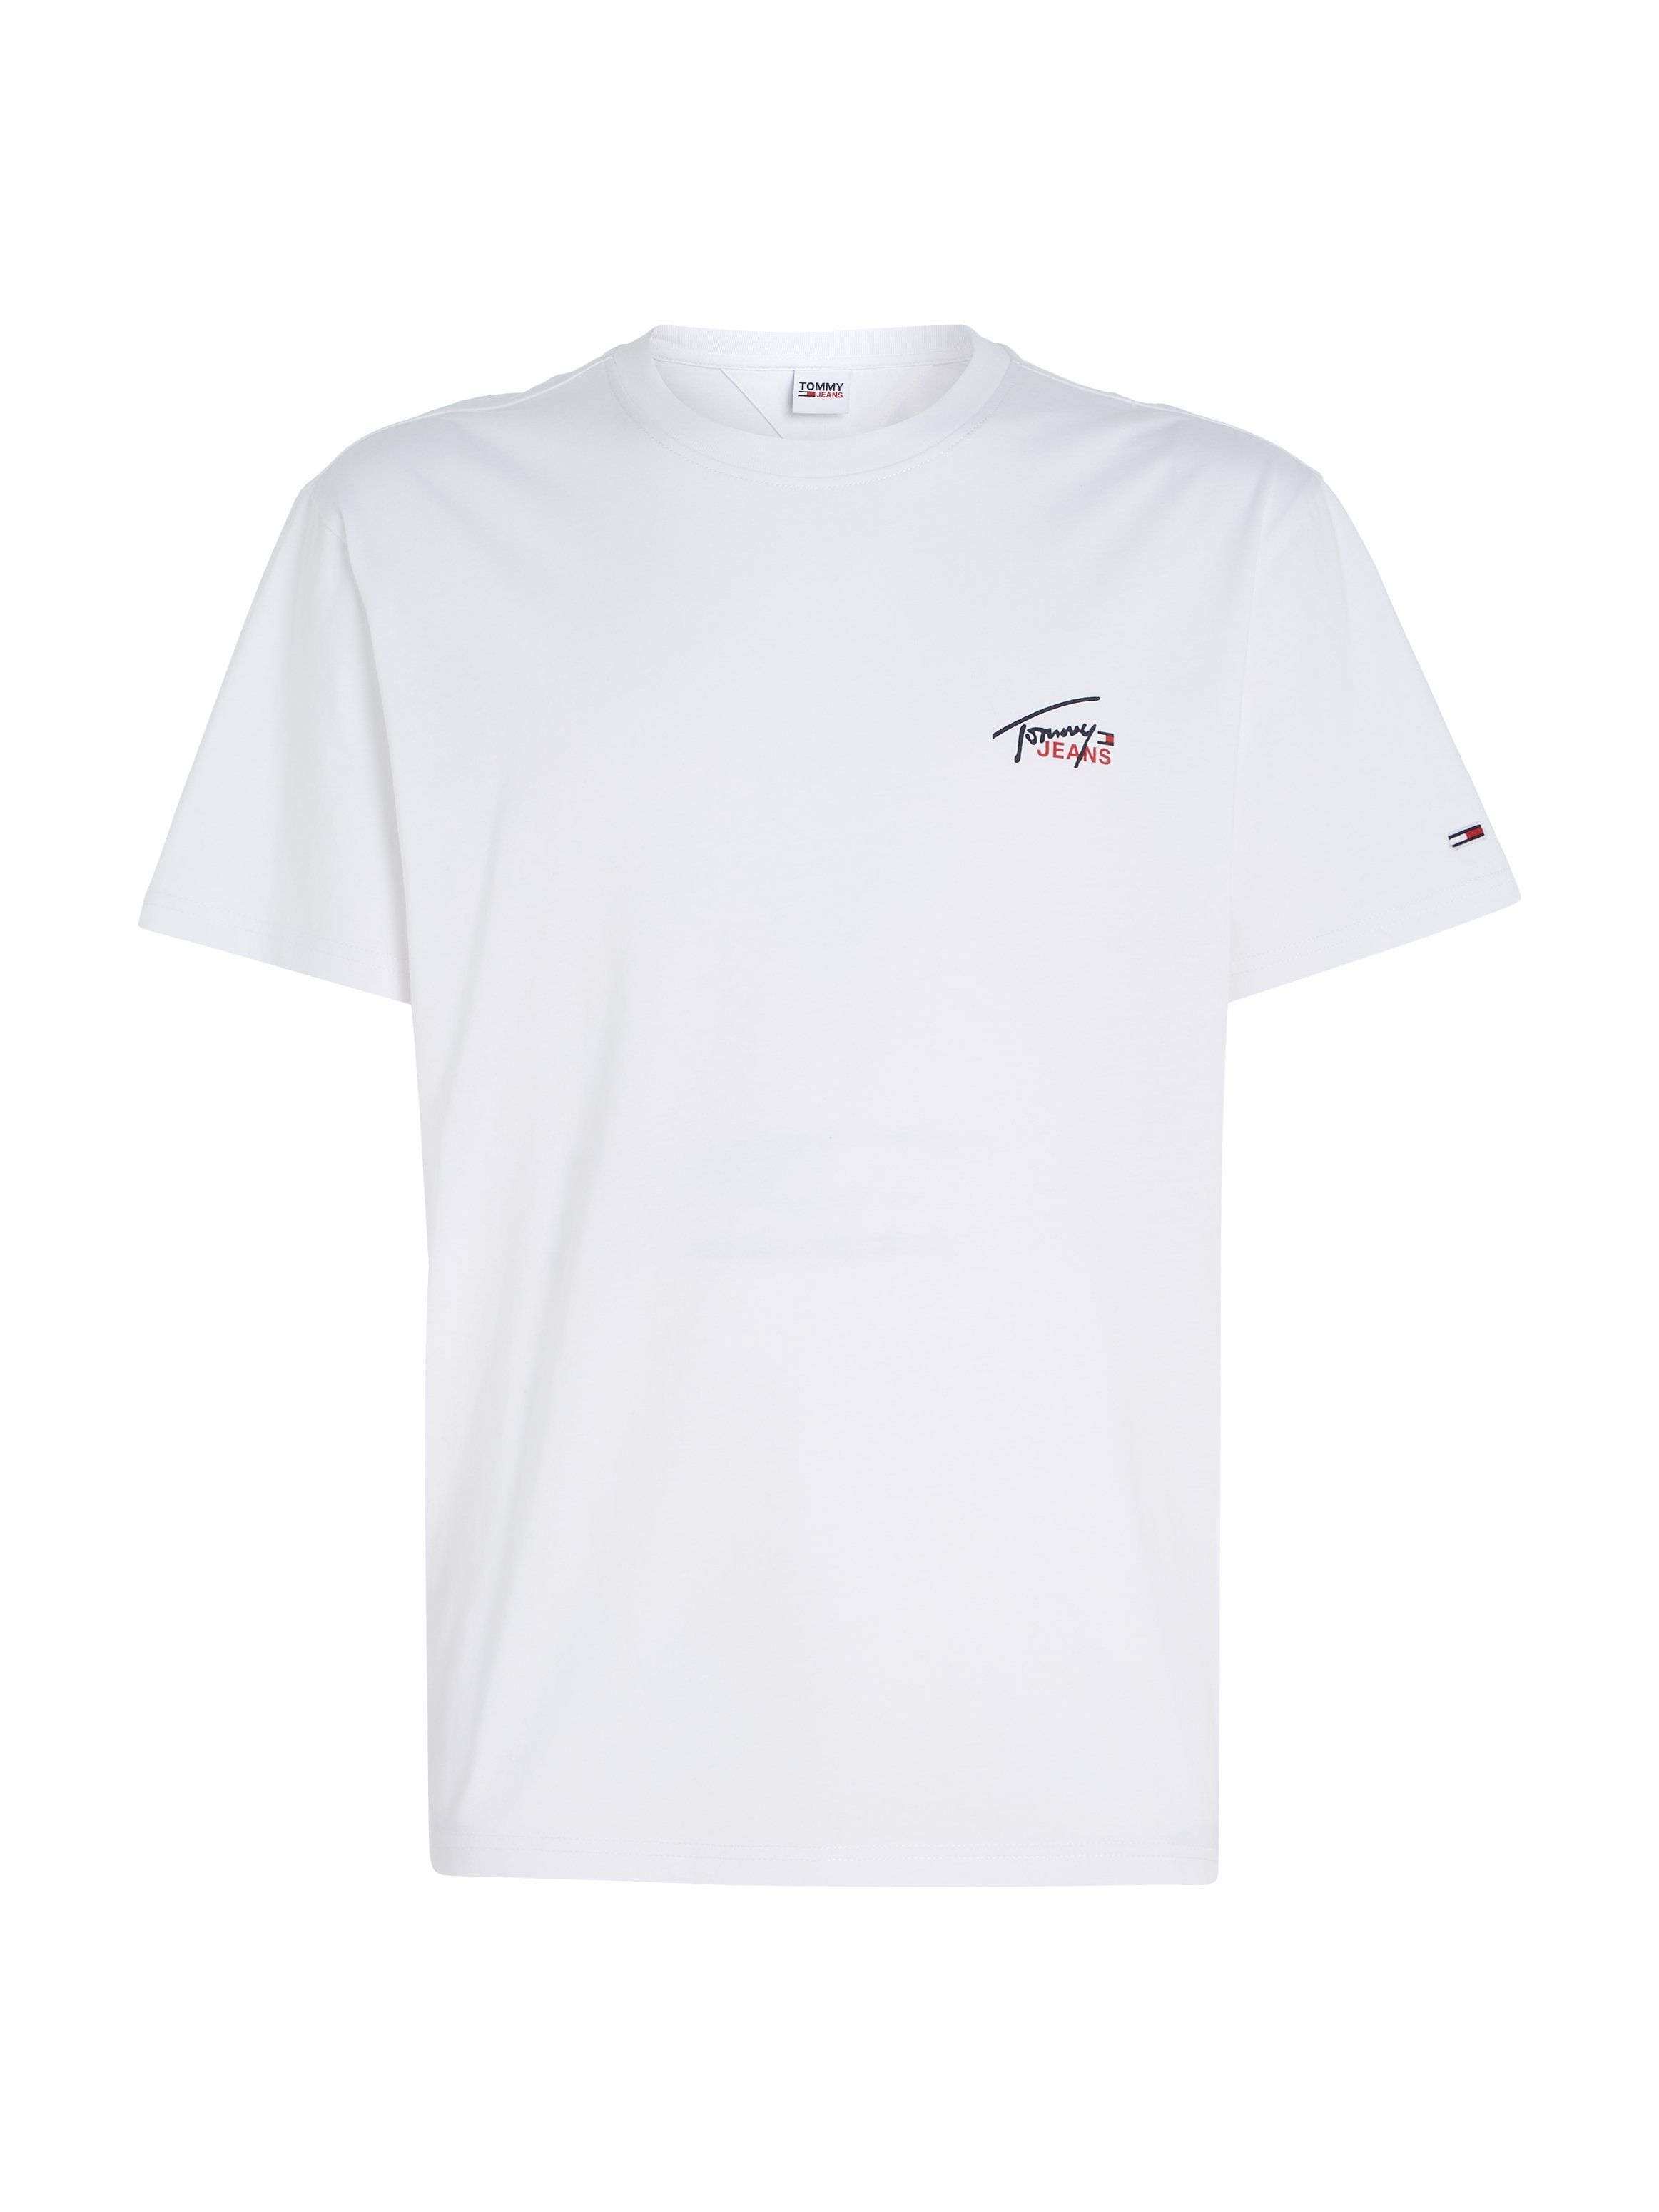 SMALL TJM Tommy T-Shirt White TEE Jeans FLAG CLSC